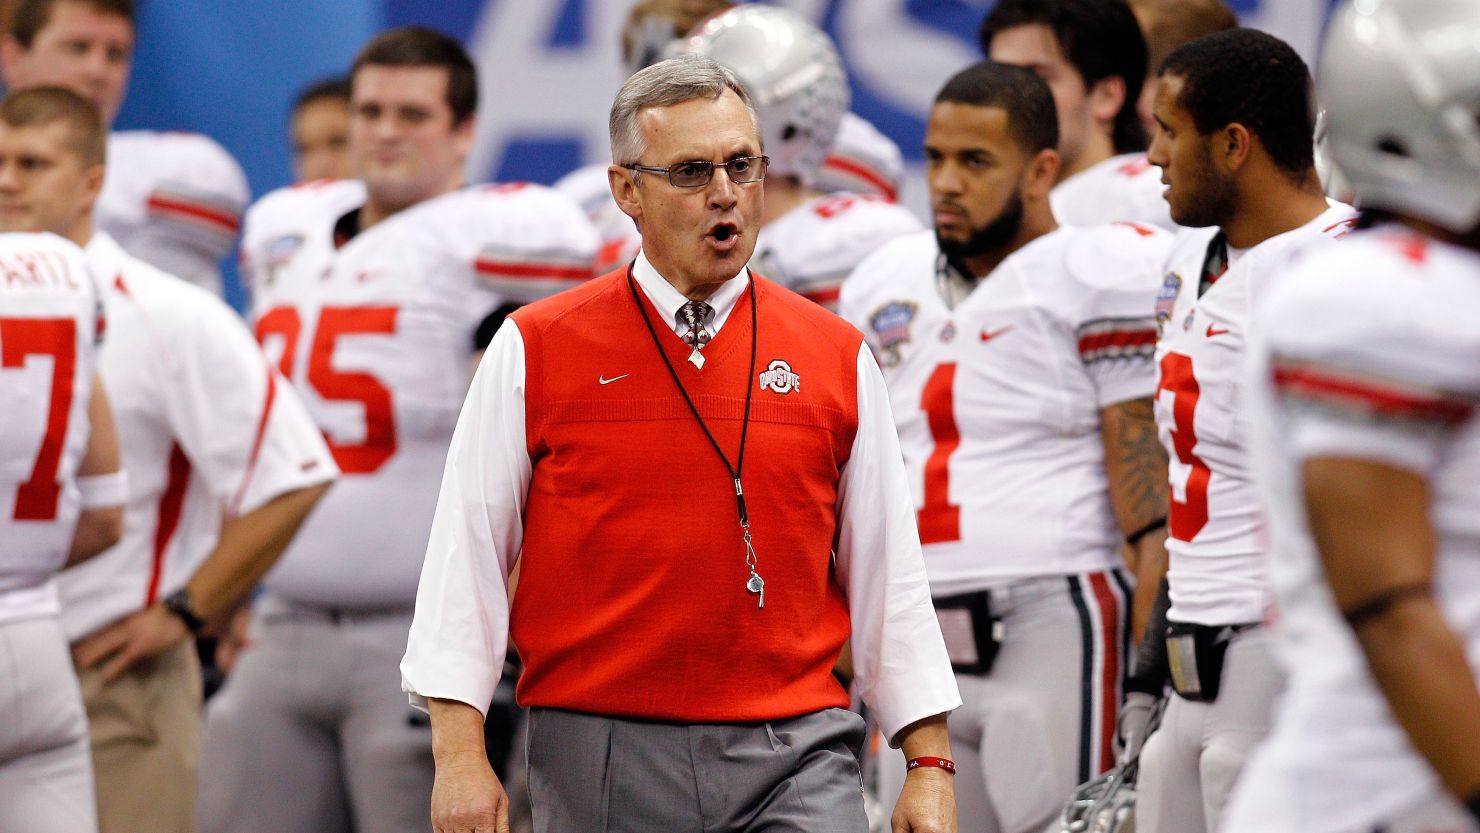 Jim Tressel is no longer Ohio State's coach, but the football tame still faces punishment for NCAA rules violations.